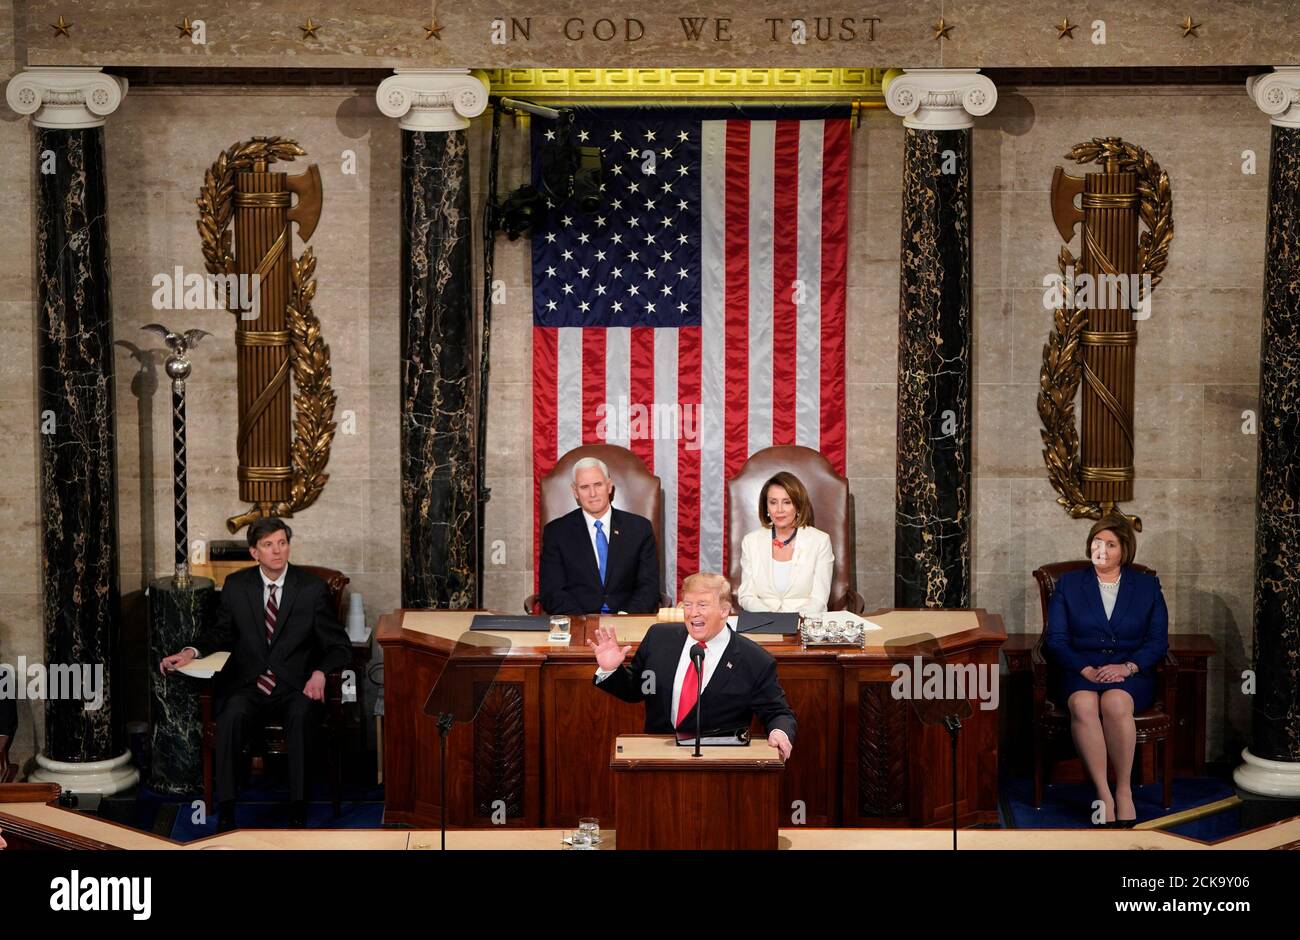 U.S. President Donald Trump delivers his second State of the Union address to a joint session of the U.S. Congress in the House Chamber of the U.S. Capitol on Capitol Hill in Washington, U.S. February 5, 2019. REUTERS/Joshua Roberts Stock Photo